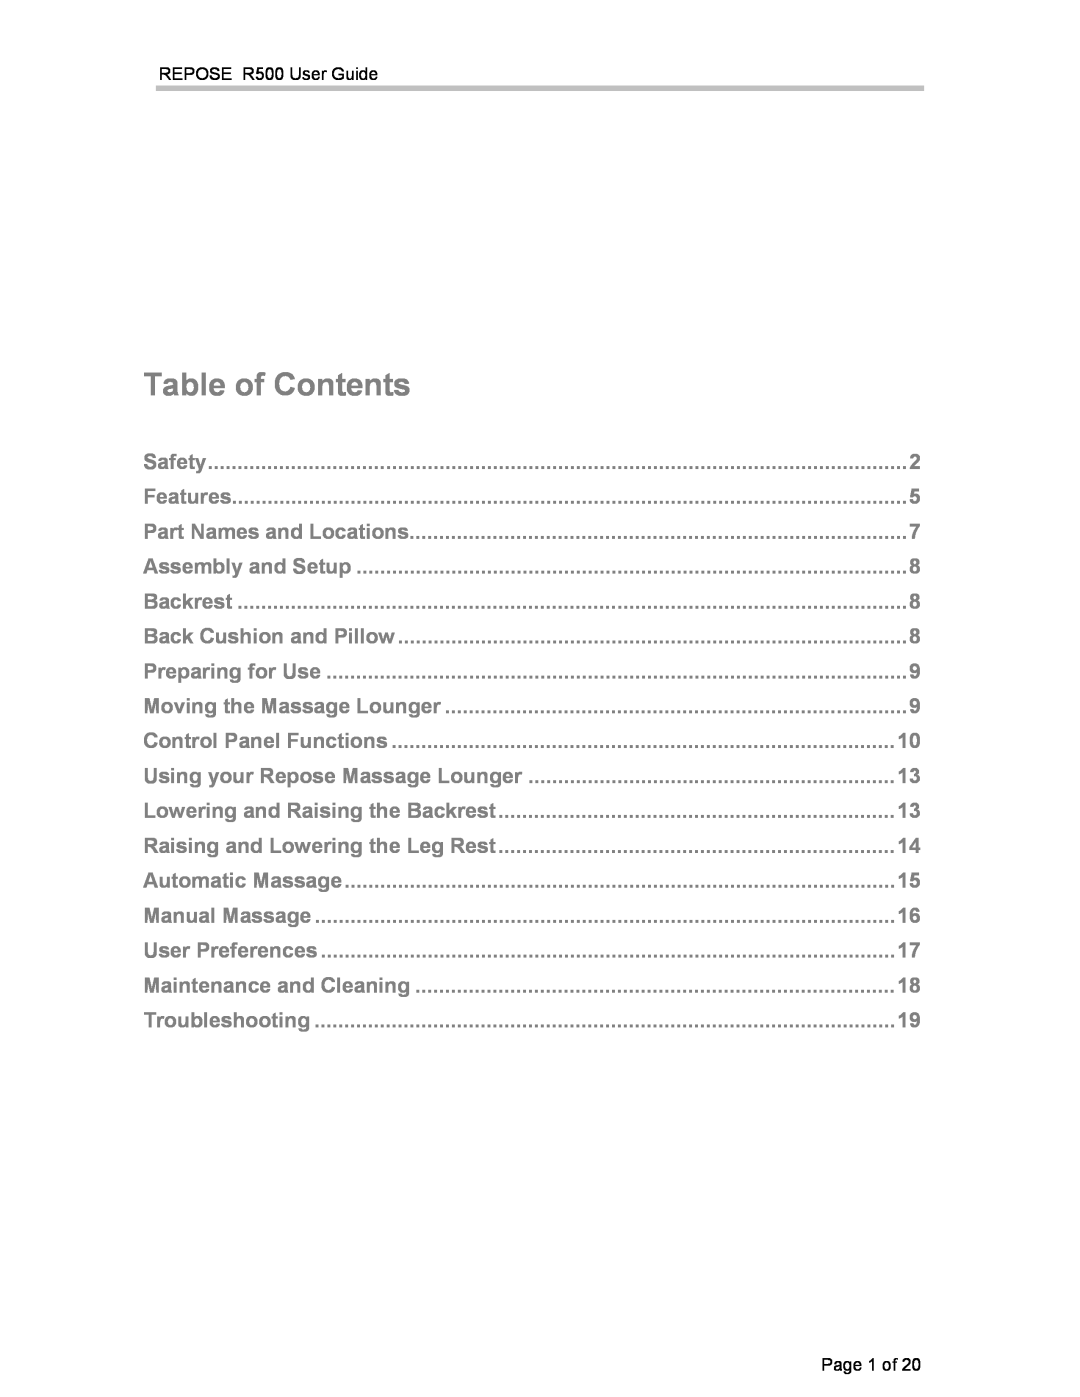 Repose R500 manual Table of Contents 